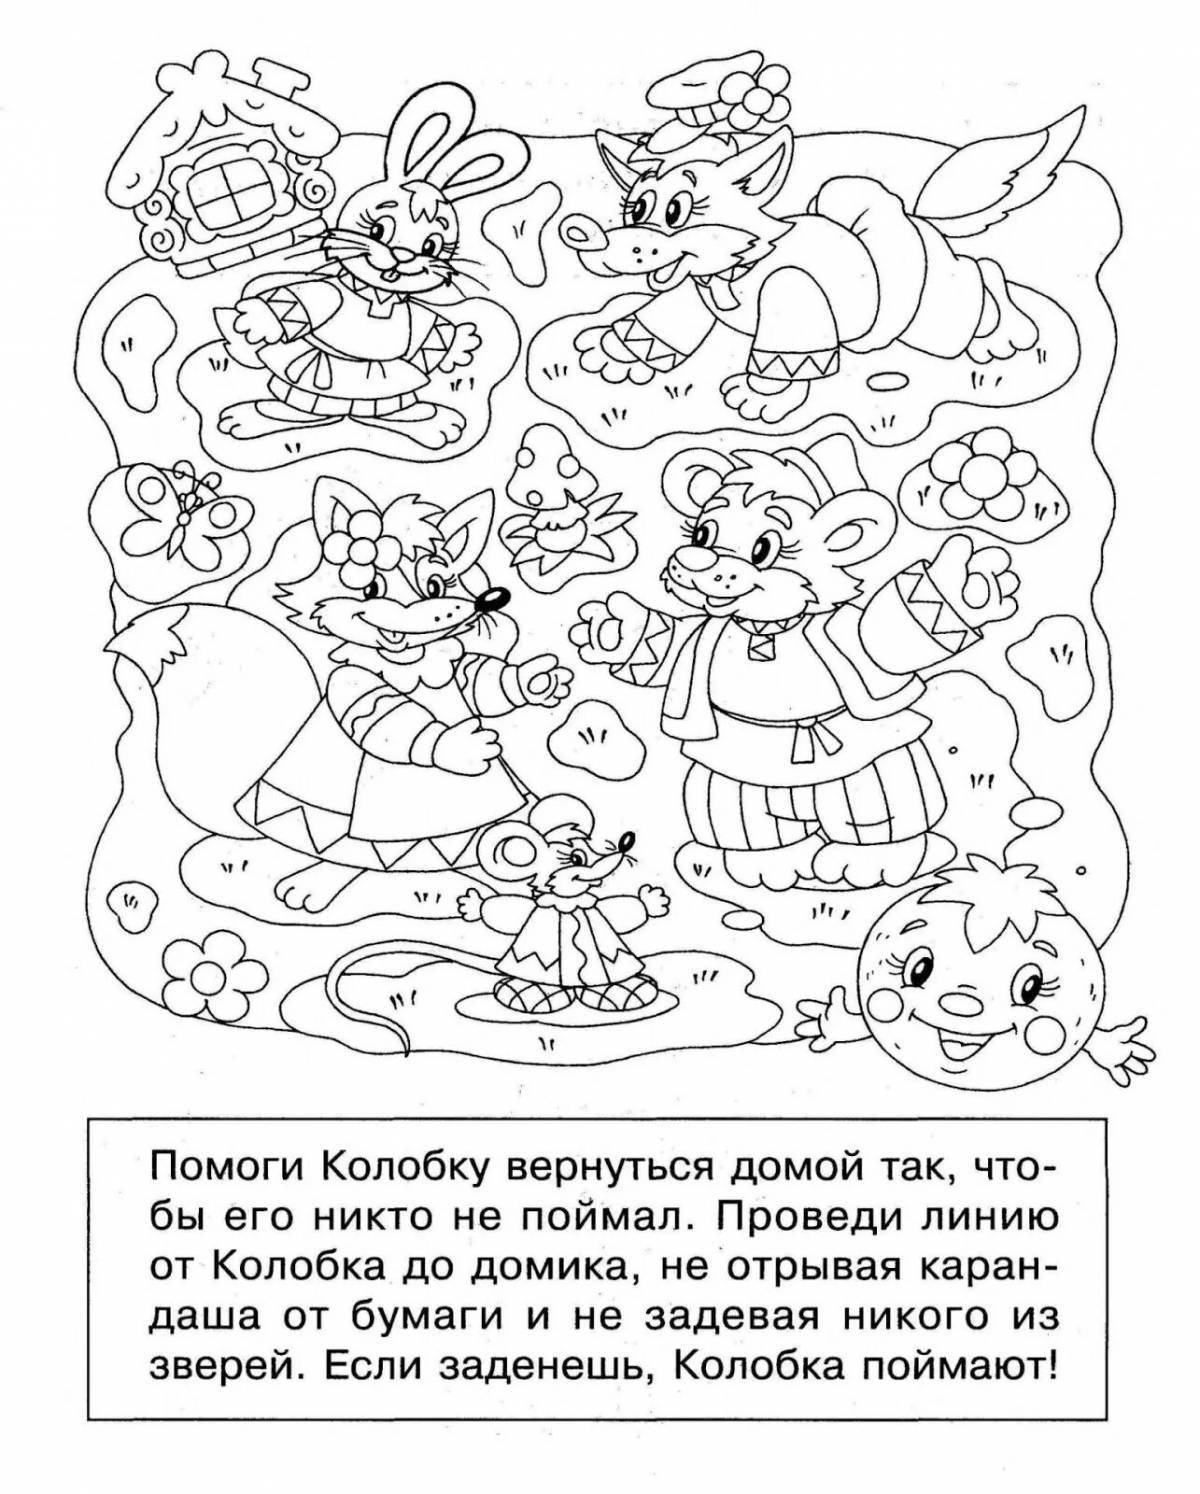 Adorable fairy tale coloring pages for preschoolers